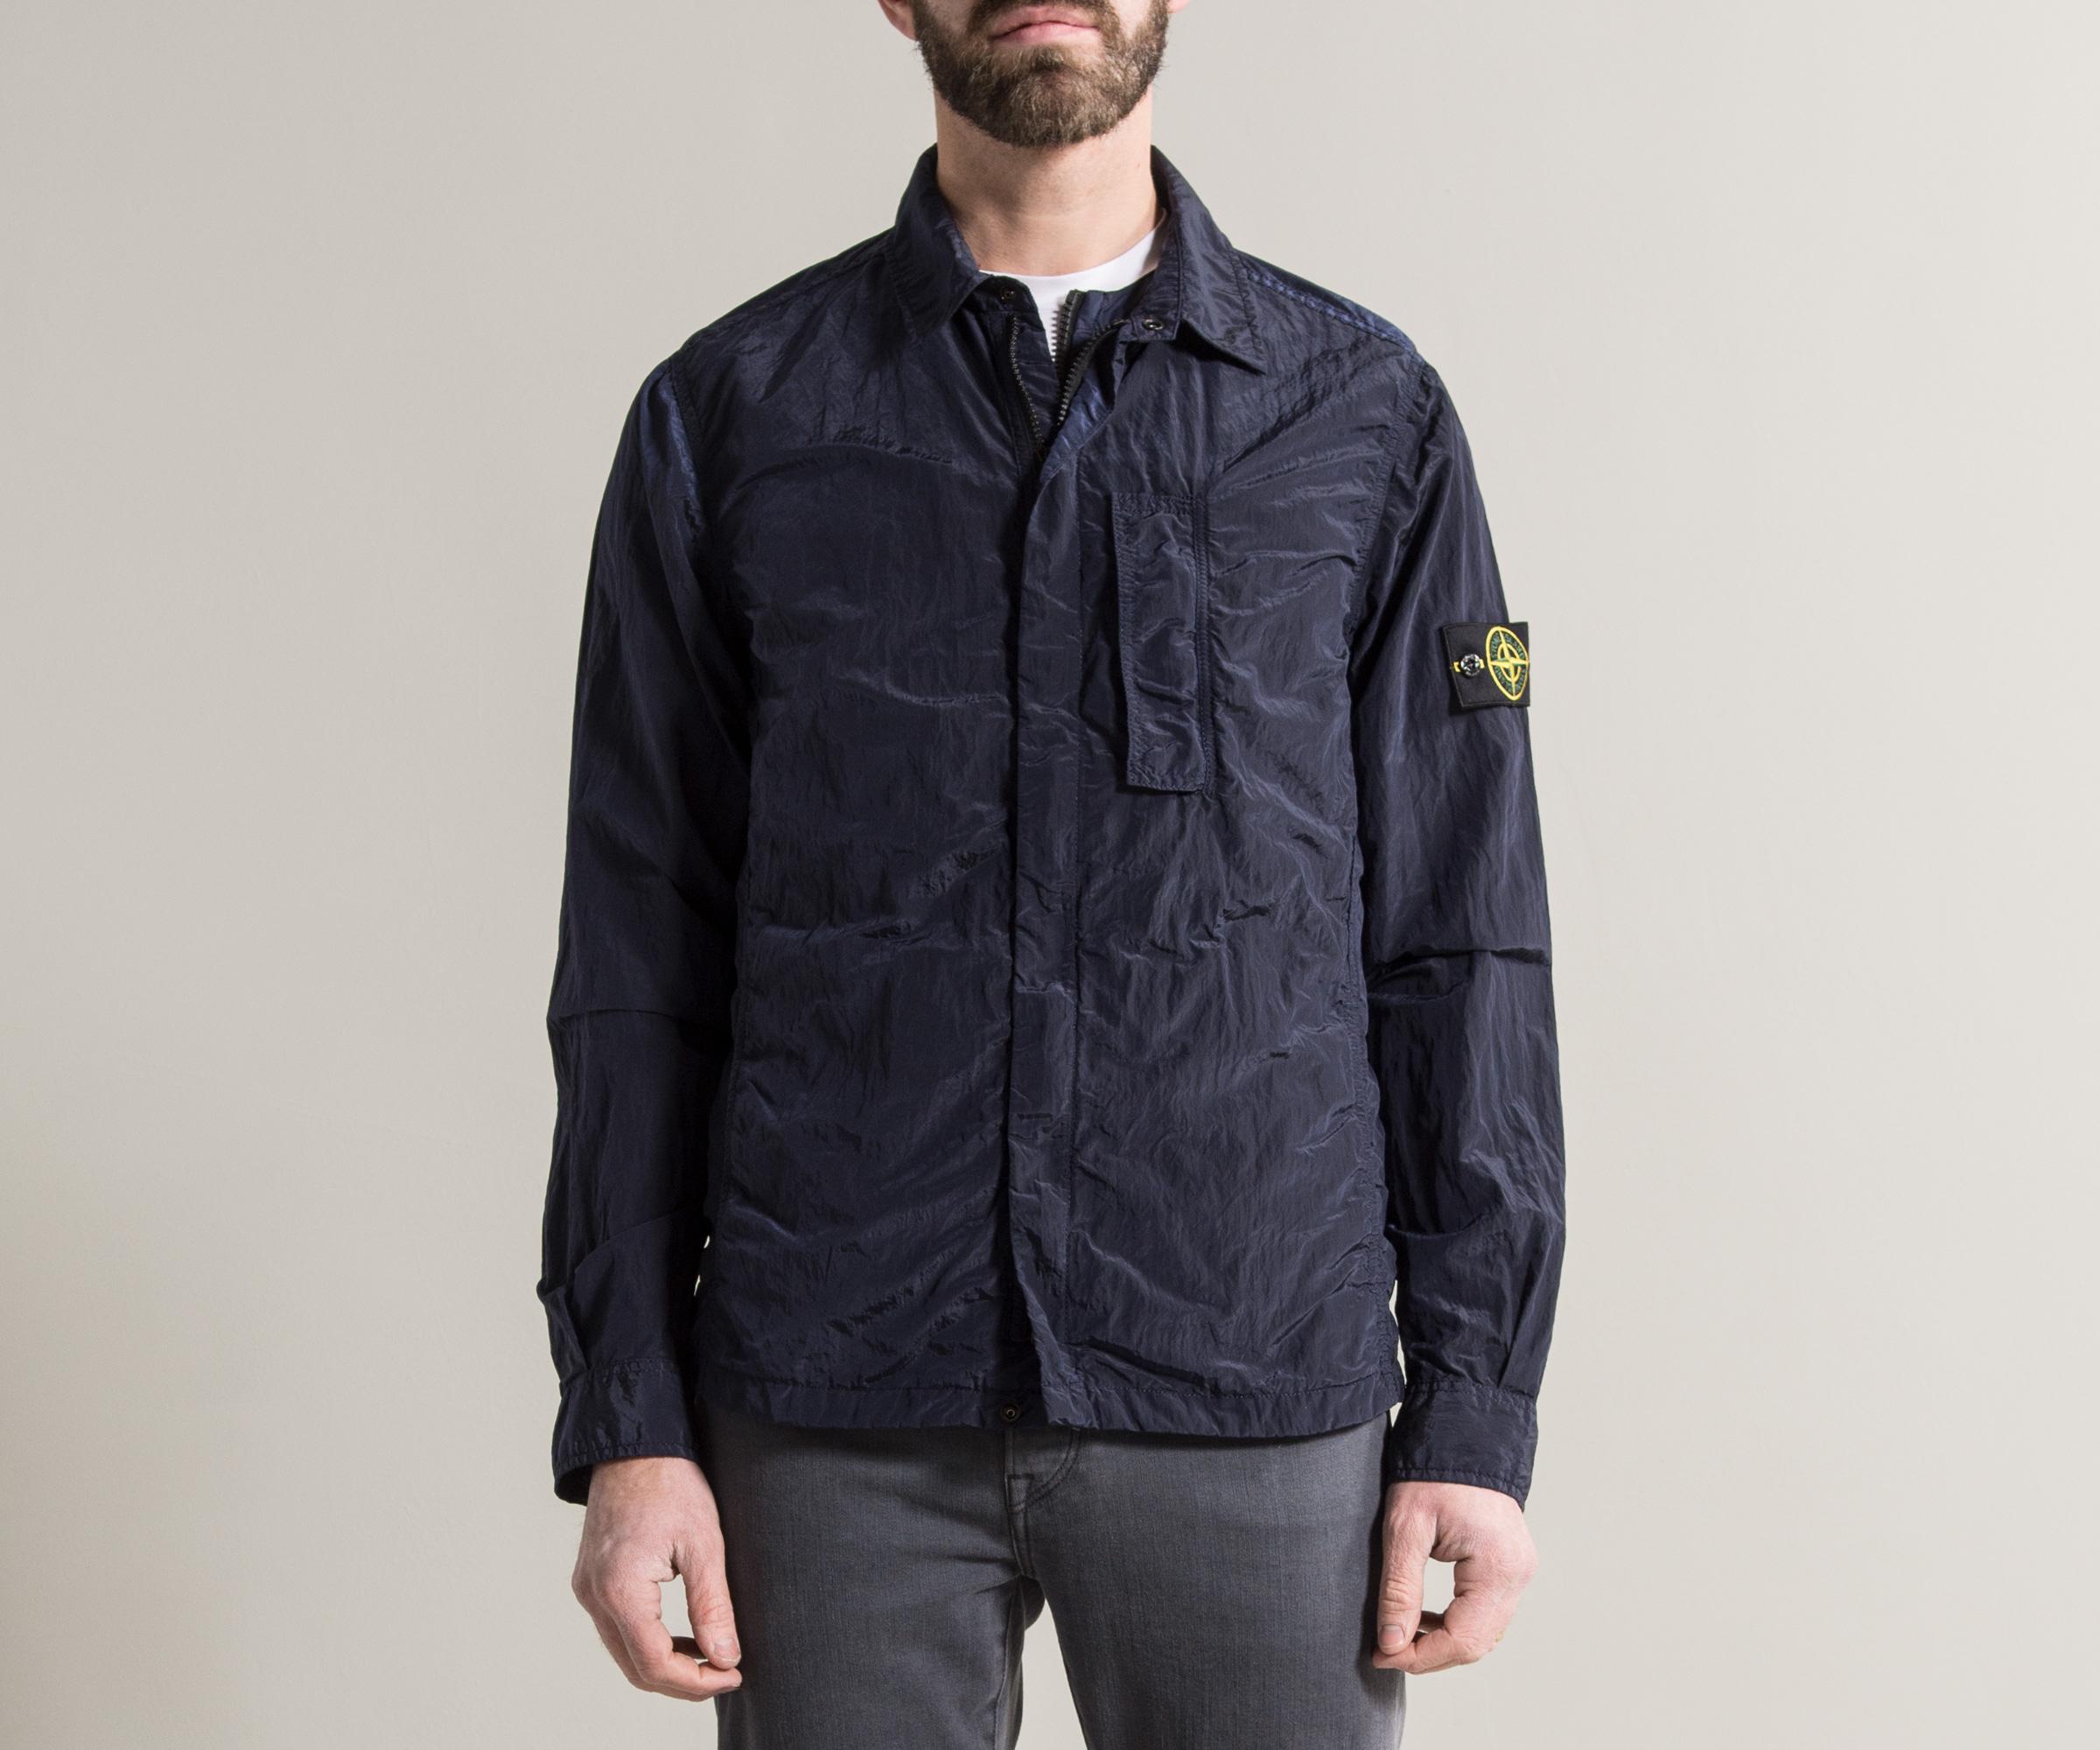 Parity > stone island overshirt navy blue, Up to 79% OFF